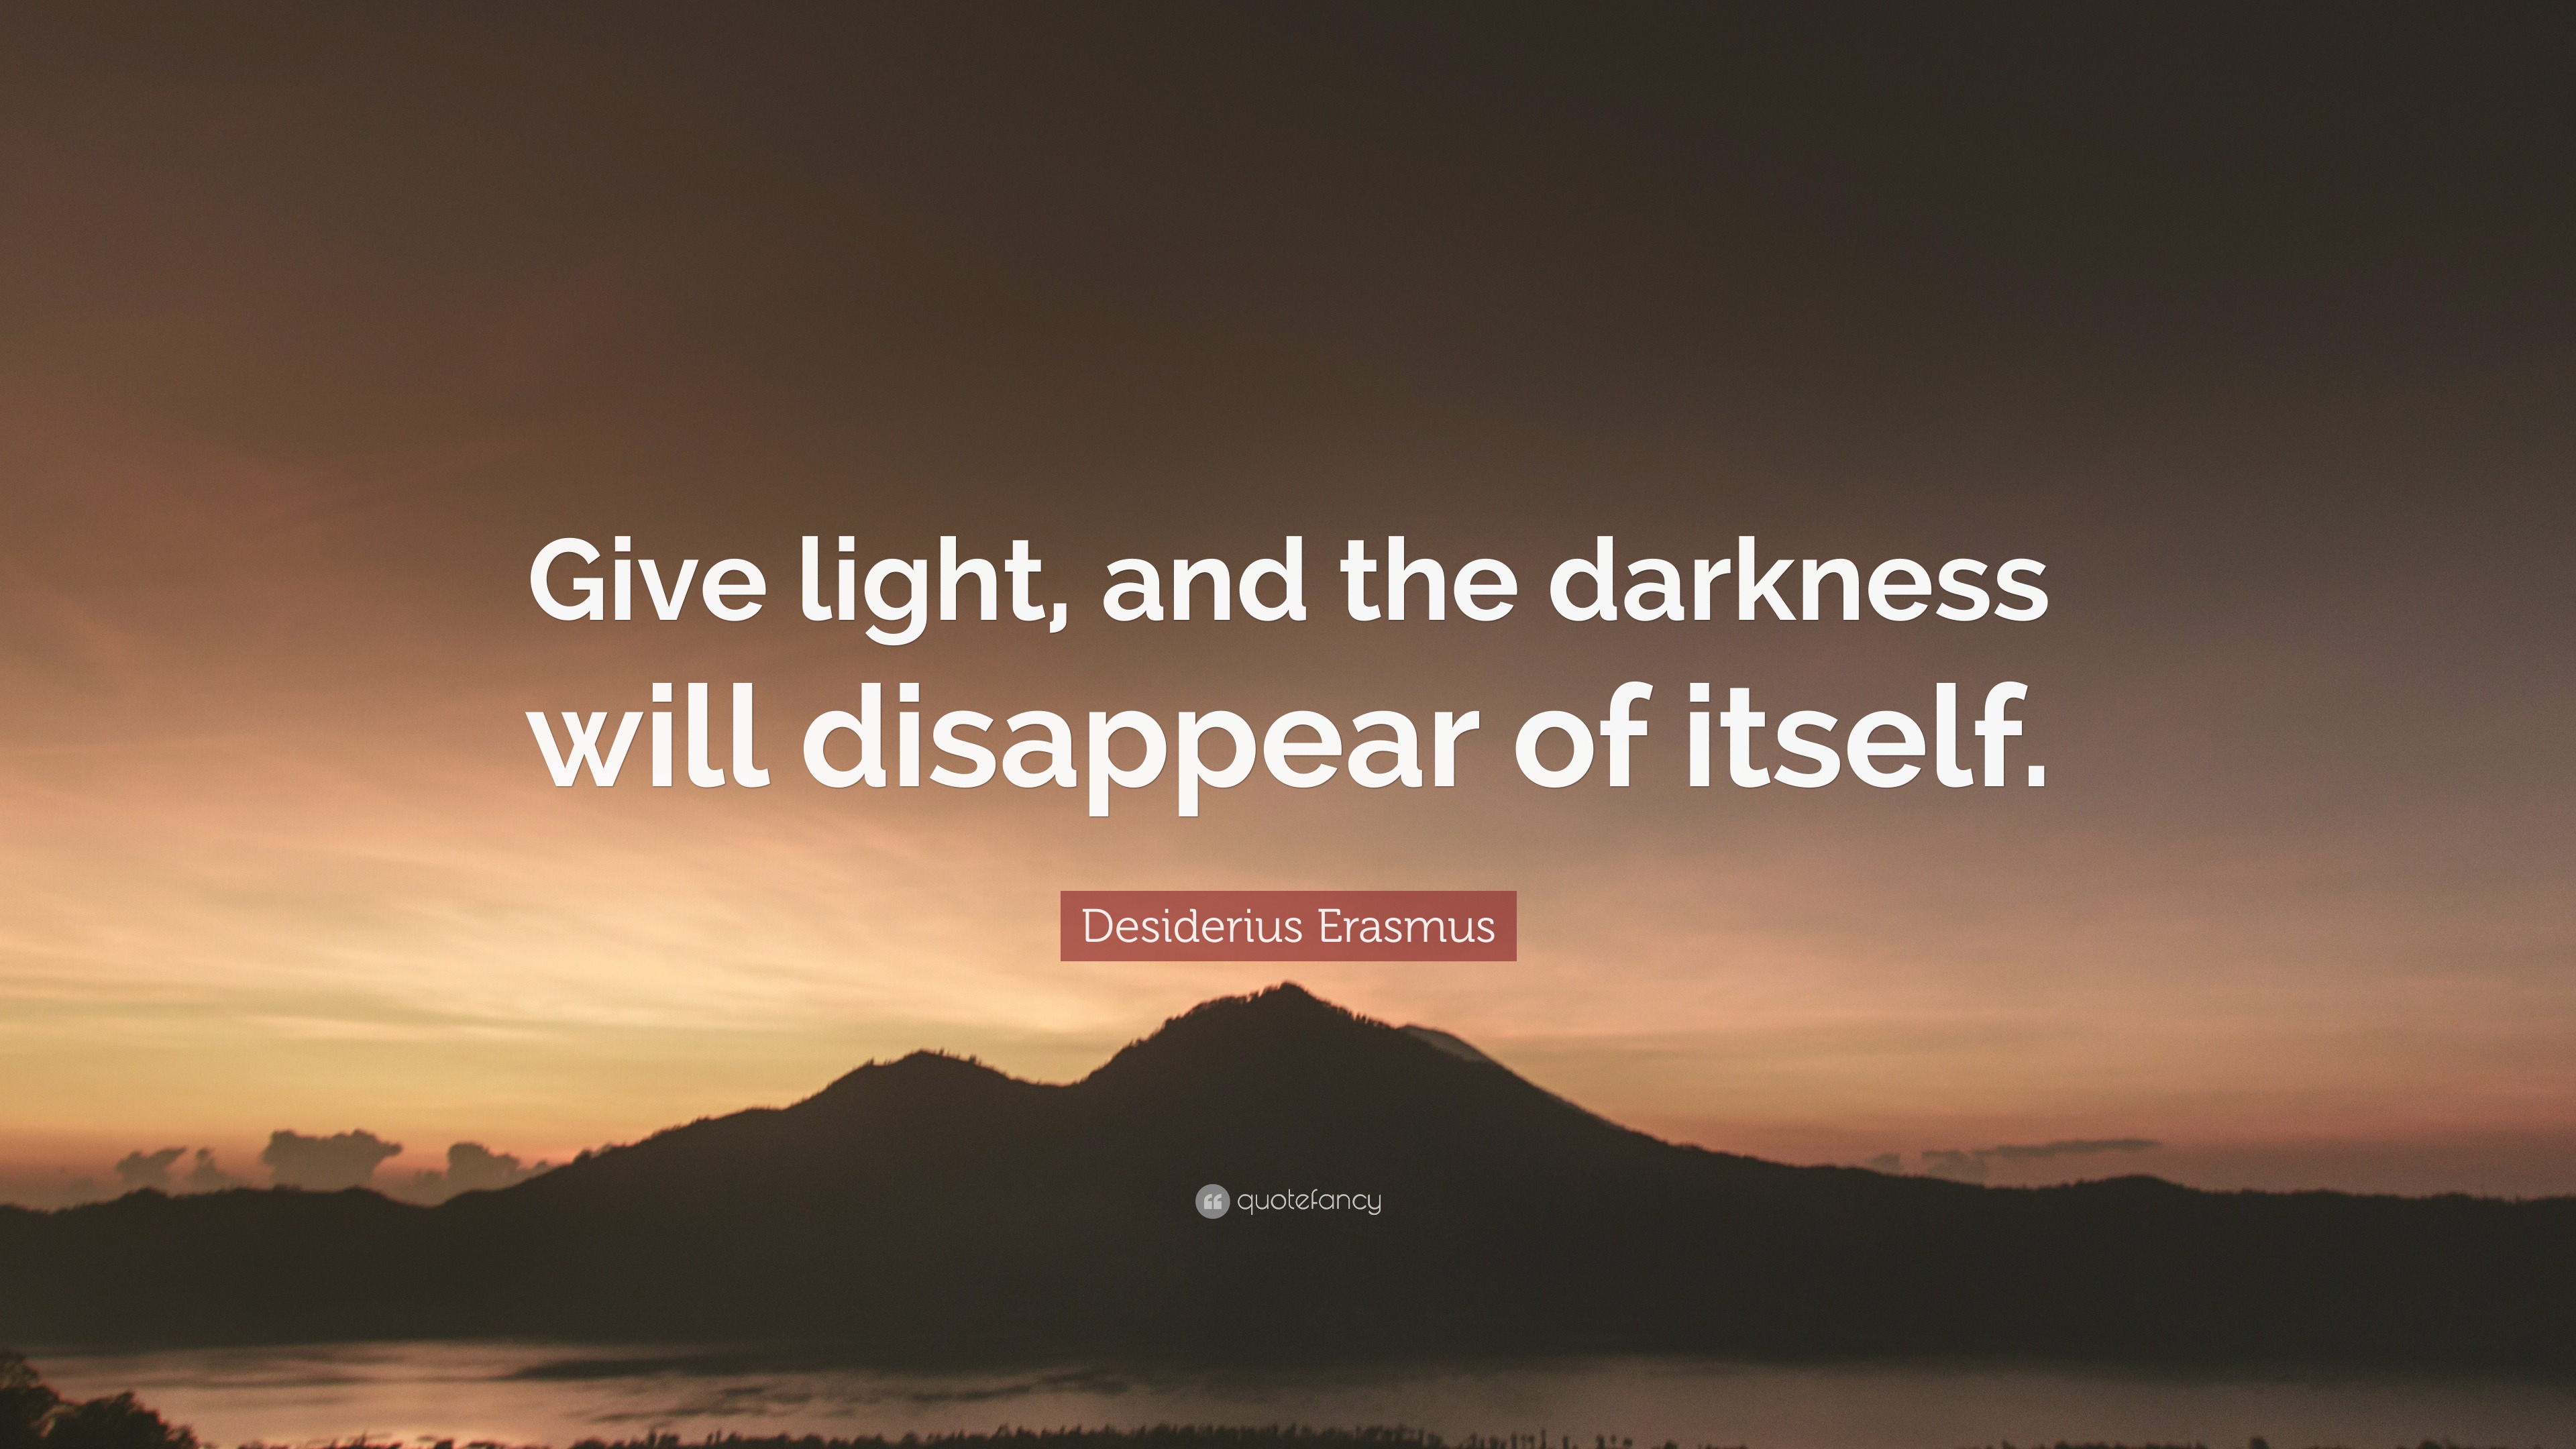 Desiderius Erasmus Quote: “Give light, and the darkness will disappear ...